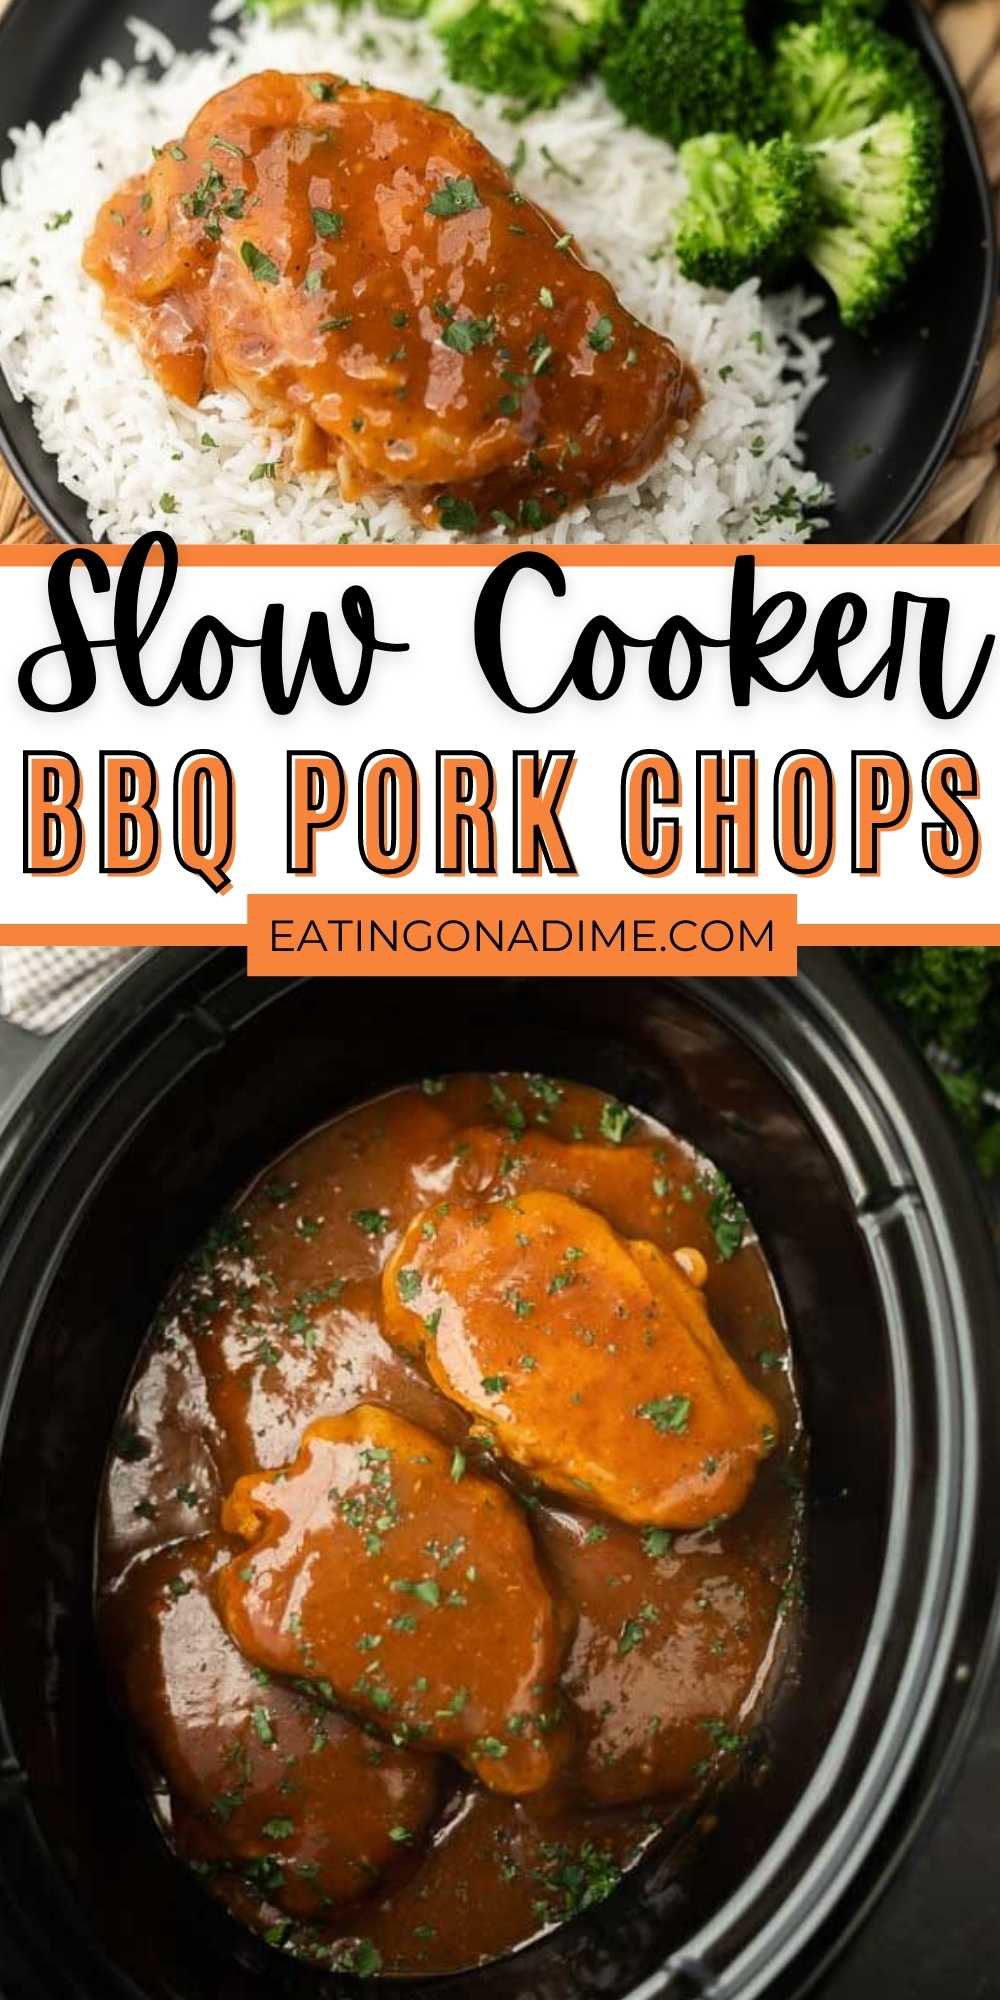 This Crock Pot BBQ Pork Chops Recipe is easy, delicious, and VERY budget friendly. They are so tender, they literally fall apart! These crock pot boneless BBQ pork chops are easy to make and packed with flavor too! #eatingonadime #crockpotrecipes #slowcookerrecipes #porkrecipes #porkchoprecipes 
